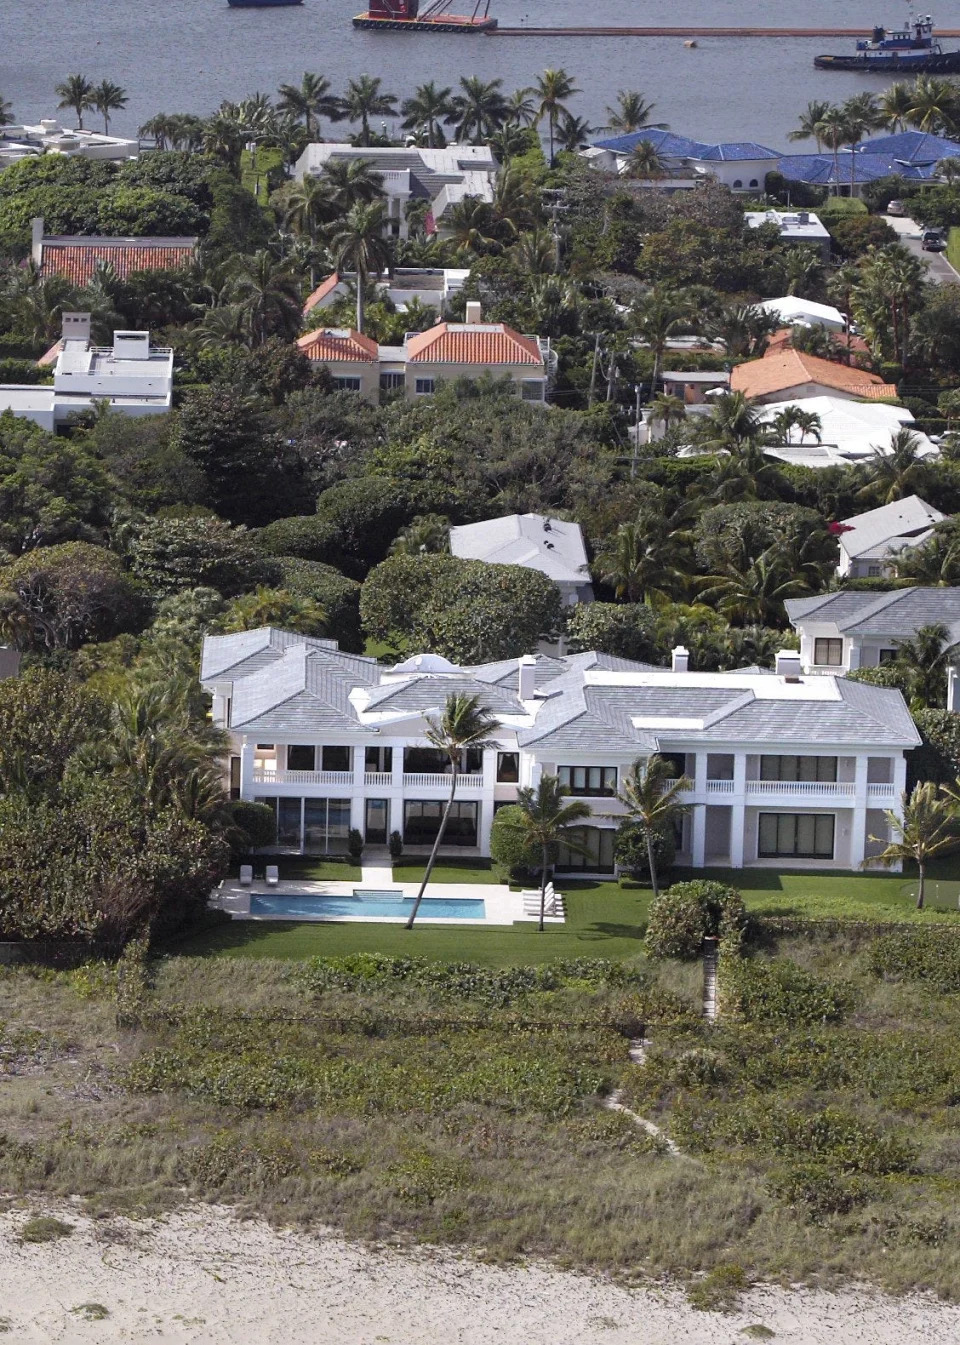 The late Rush Limbaugh owned this Palm Beach estate for years at 1495 N. Ocean Blvd., seen here in a file photo. The oceanfront estate is being demolished by cosmetics billionaire William P. Lauder, who bought it through an ownership company for a recorded $155 million in March from Limbaugh&#39;s widow, Kathryn Adams Limbaugh.